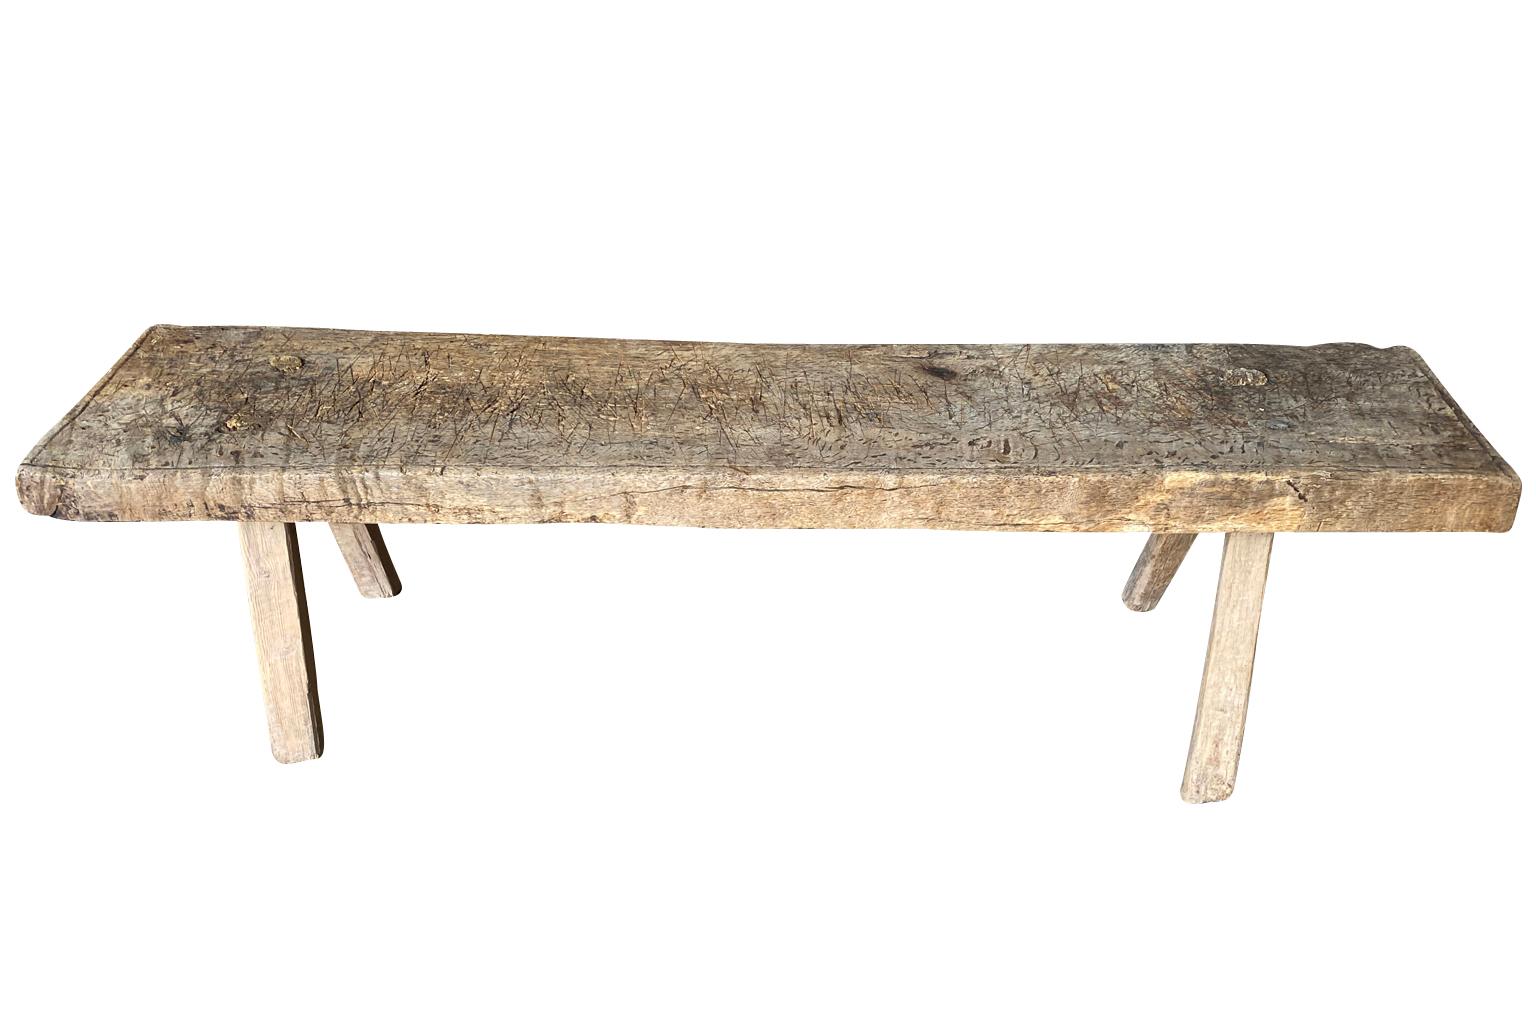 A =rustic 19th century Bench - Coffee Table from the Catalan region of Spain.  Soundly constructed from naturally washed oak with a solid board top and slightly splayed legs.  Super patina and graining.